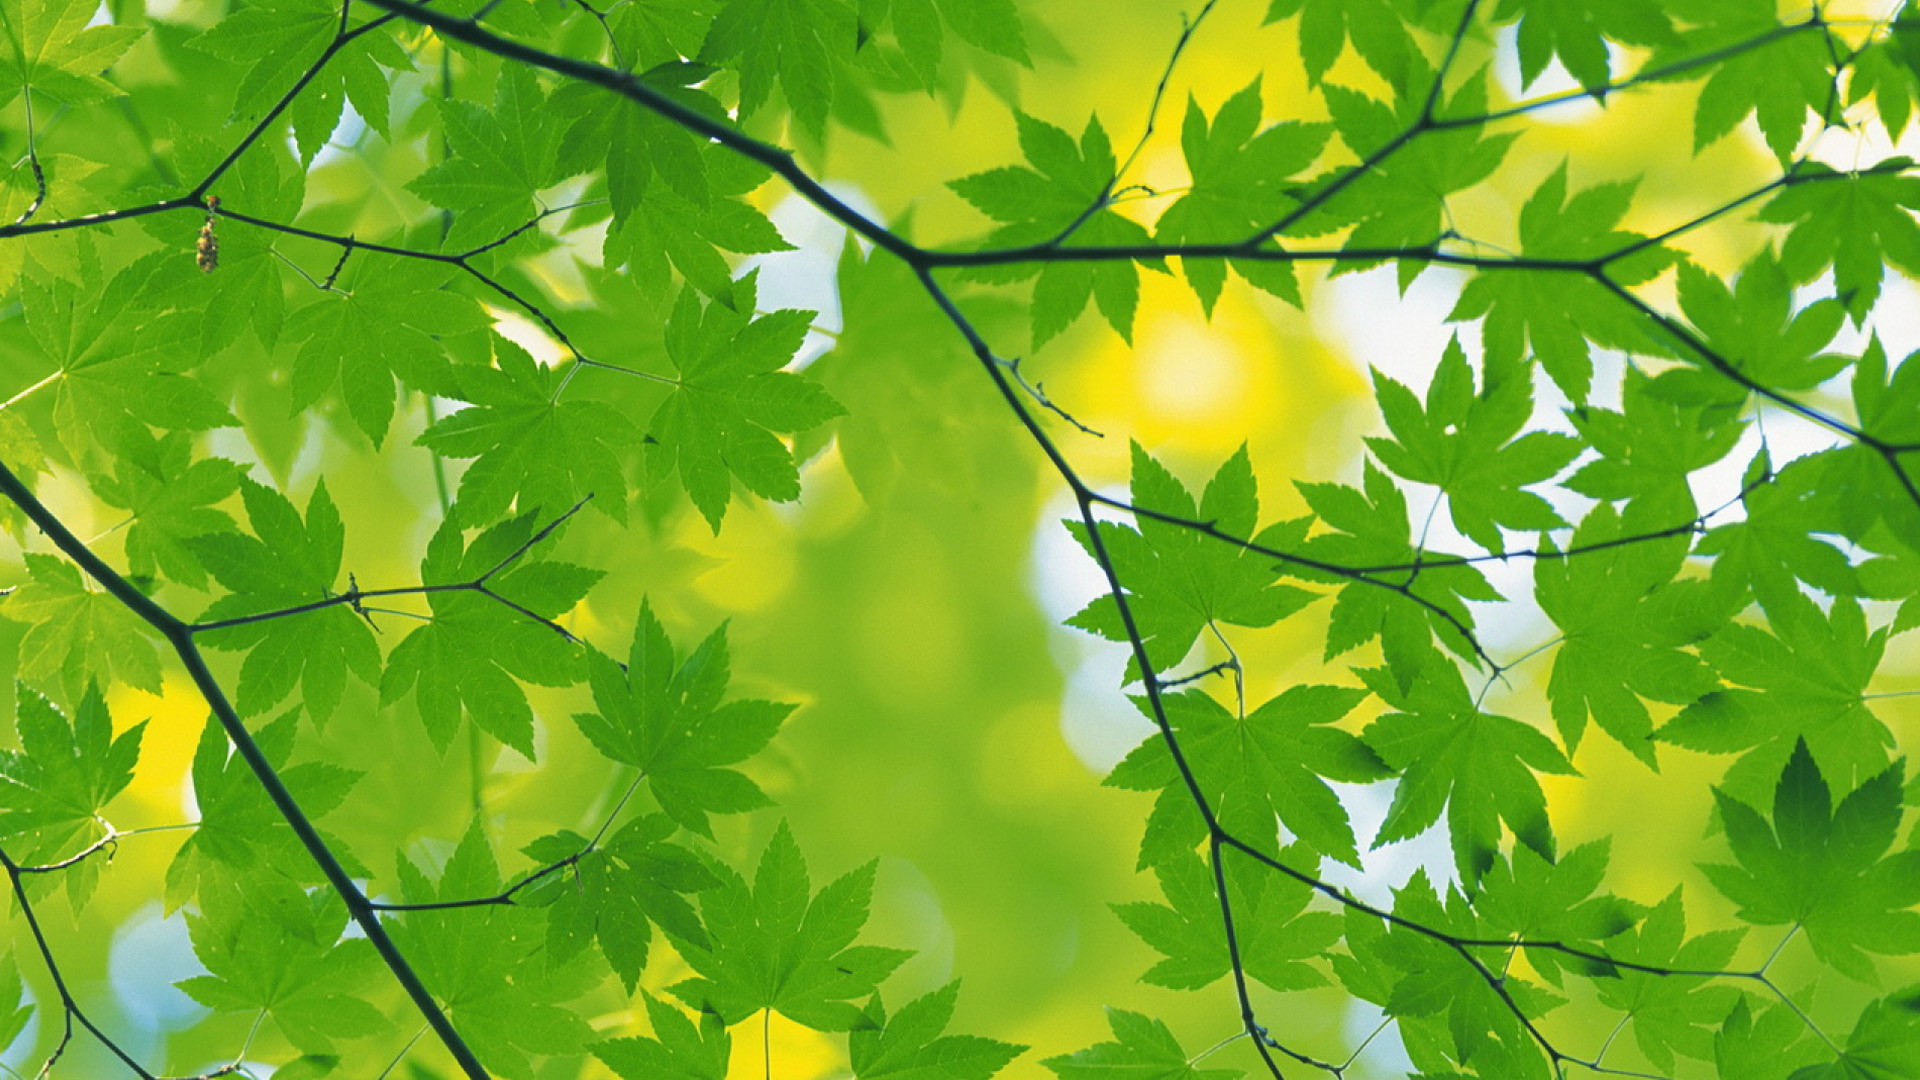 Fresh green leaves wallpaper, Green Backgrounds, Pictures and images ...